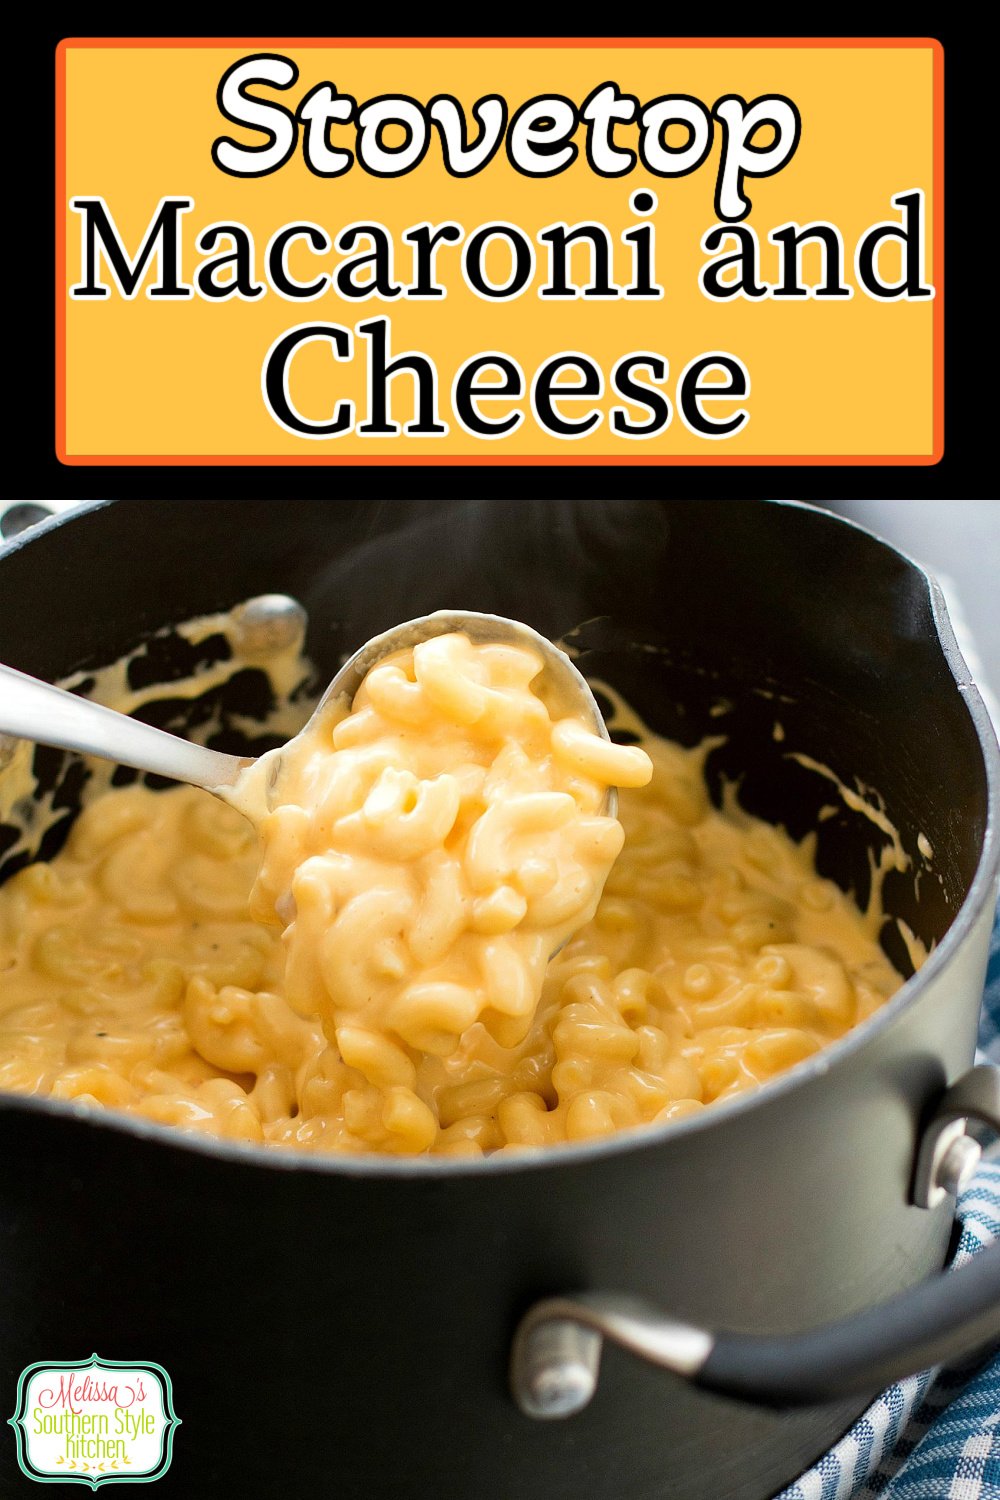 This Creamy Stovetop Macaroni and Cheese requires no oven time at all #macaroniandcheese #macandcheese #cheese #pastarecipes #macaroni #dinner #dinnerideas #southernmacaroniandcheese #southernfood #southernrecipes via @melissasssk